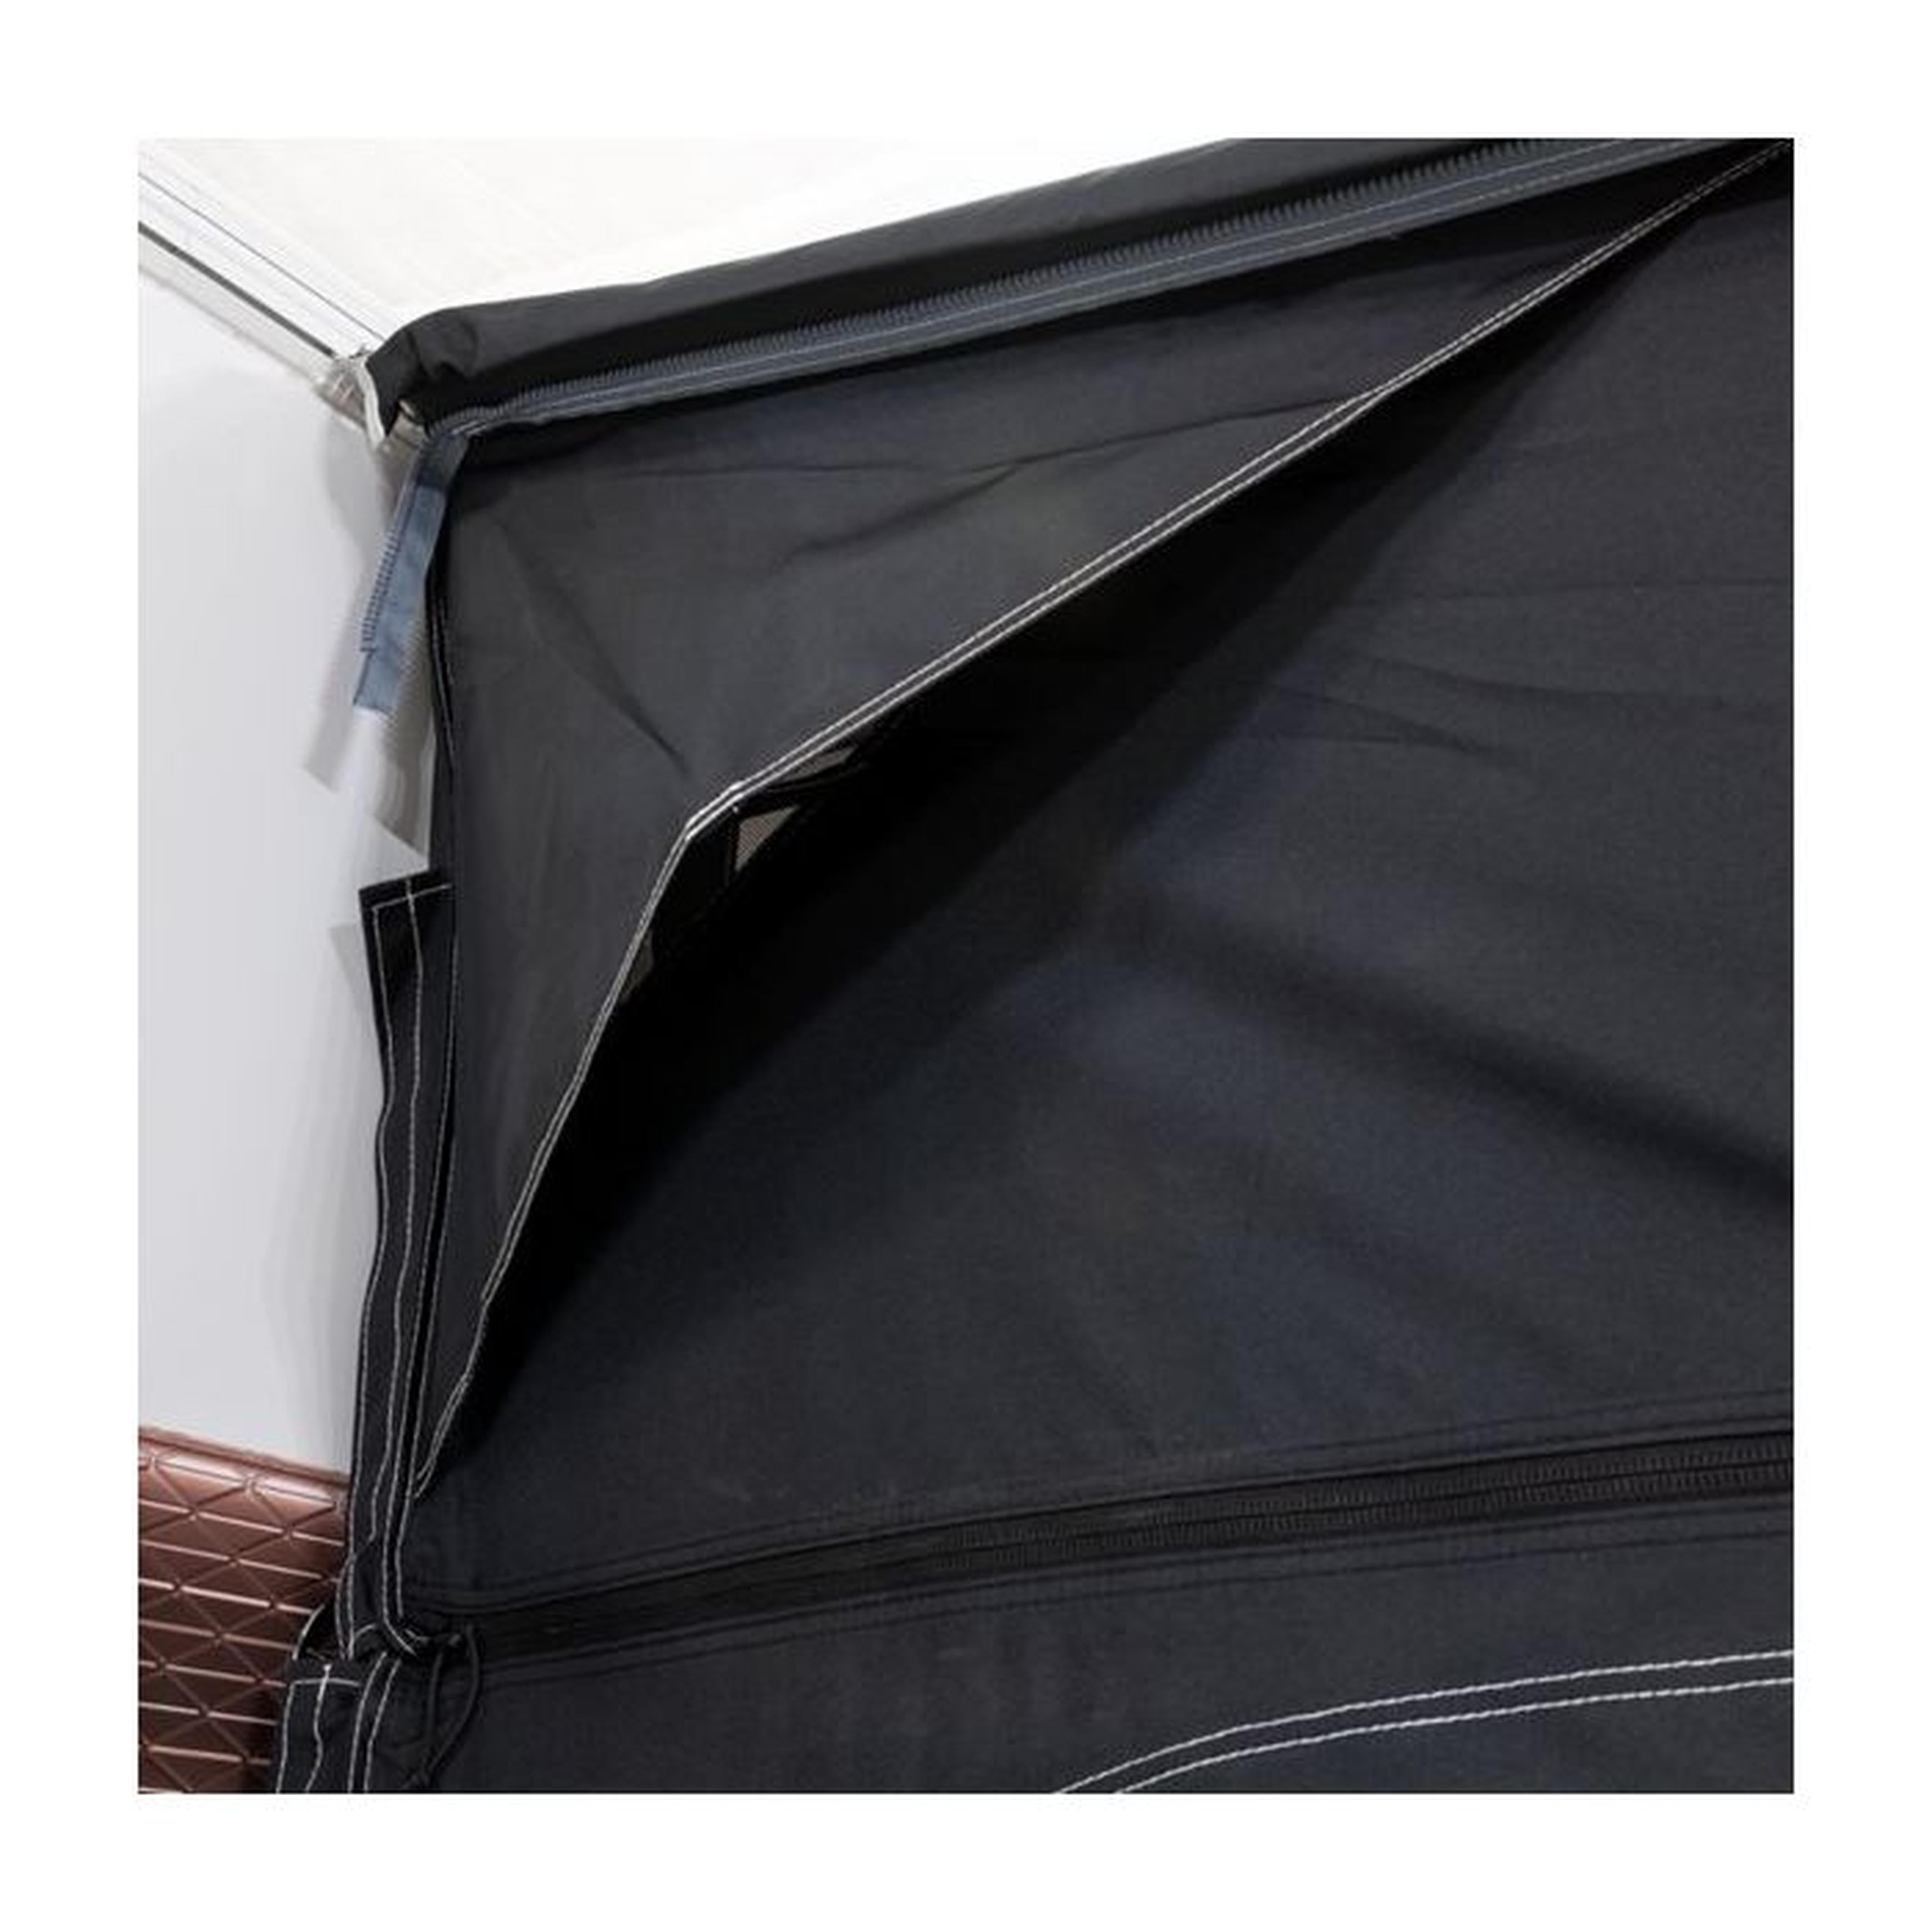 Dometic Club Air Pro 390 S Awning 2023 Model